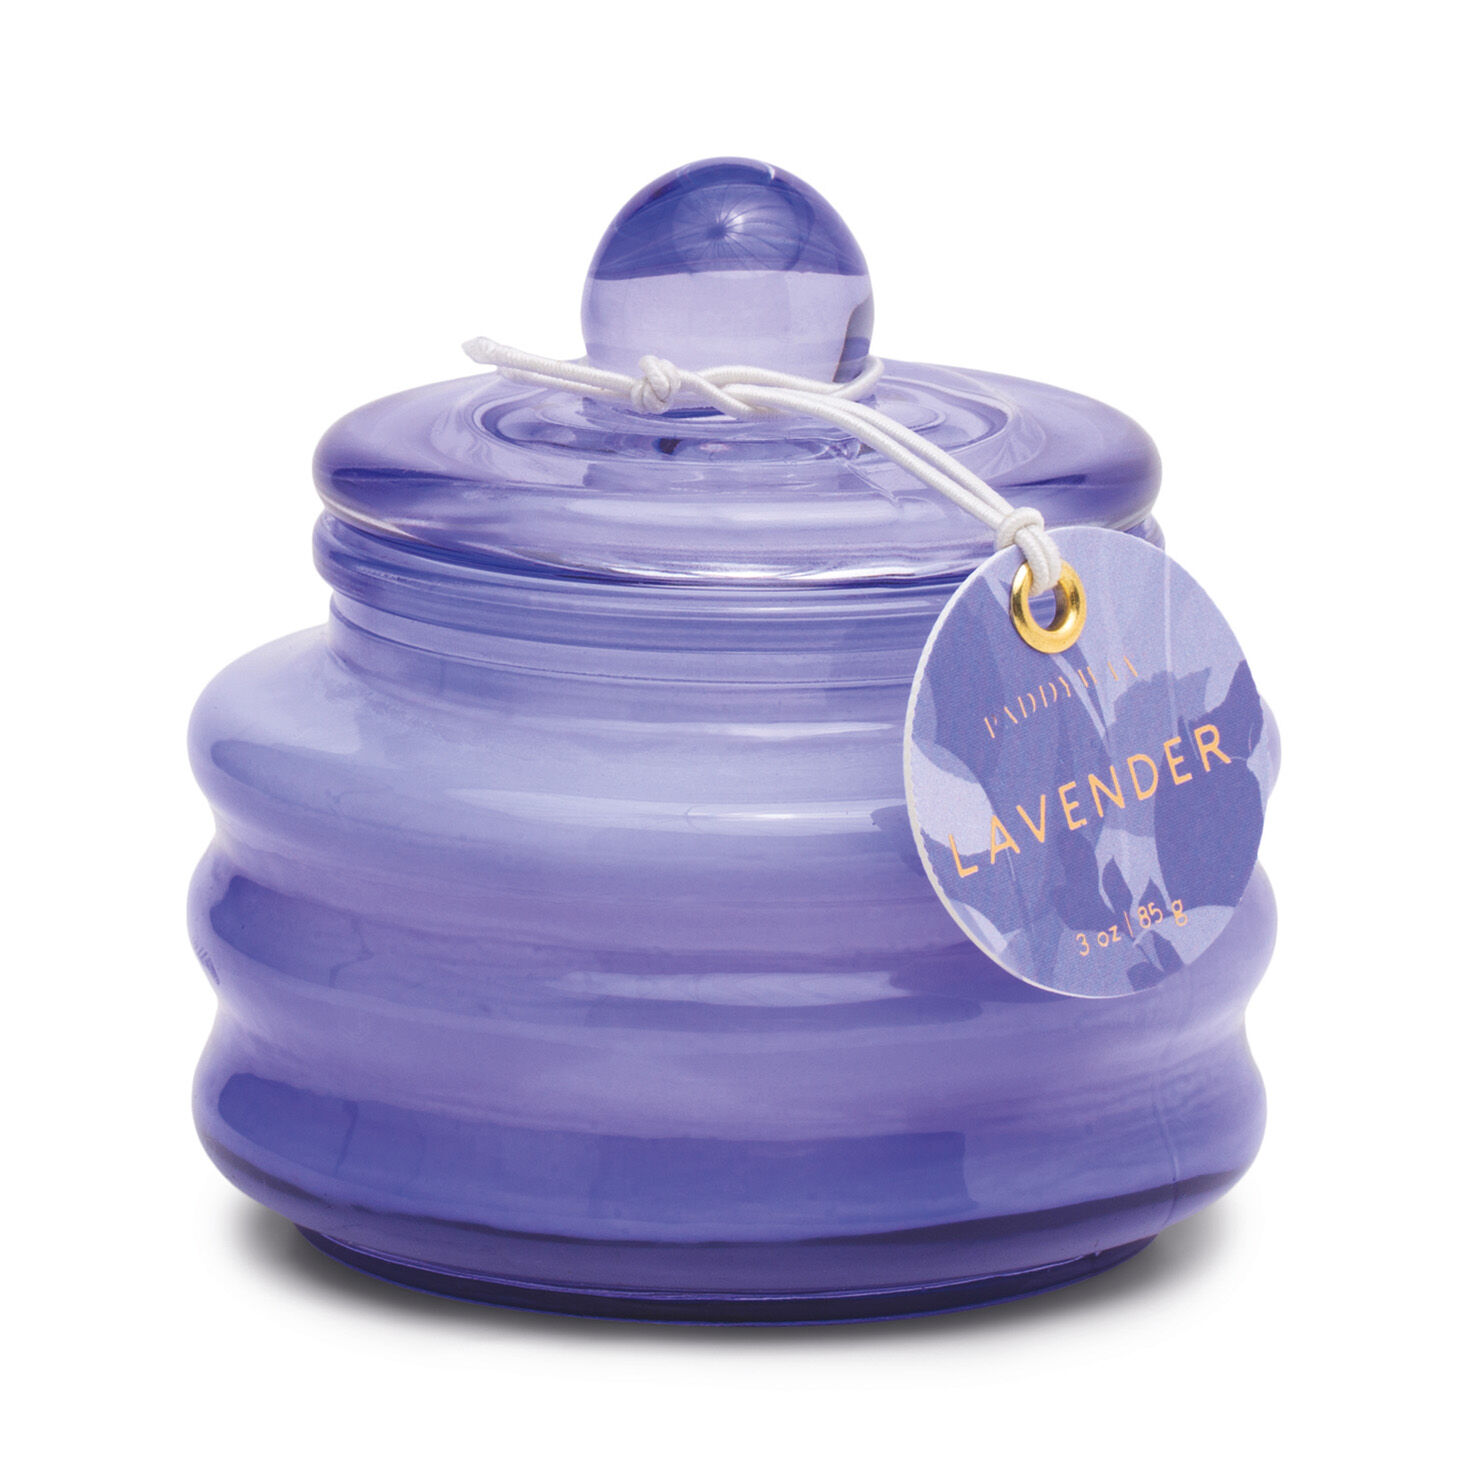 Paddywax Beam Lavender Lilac Glass Jar Candle, 3 oz. for only USD 14.99 | Hallmark